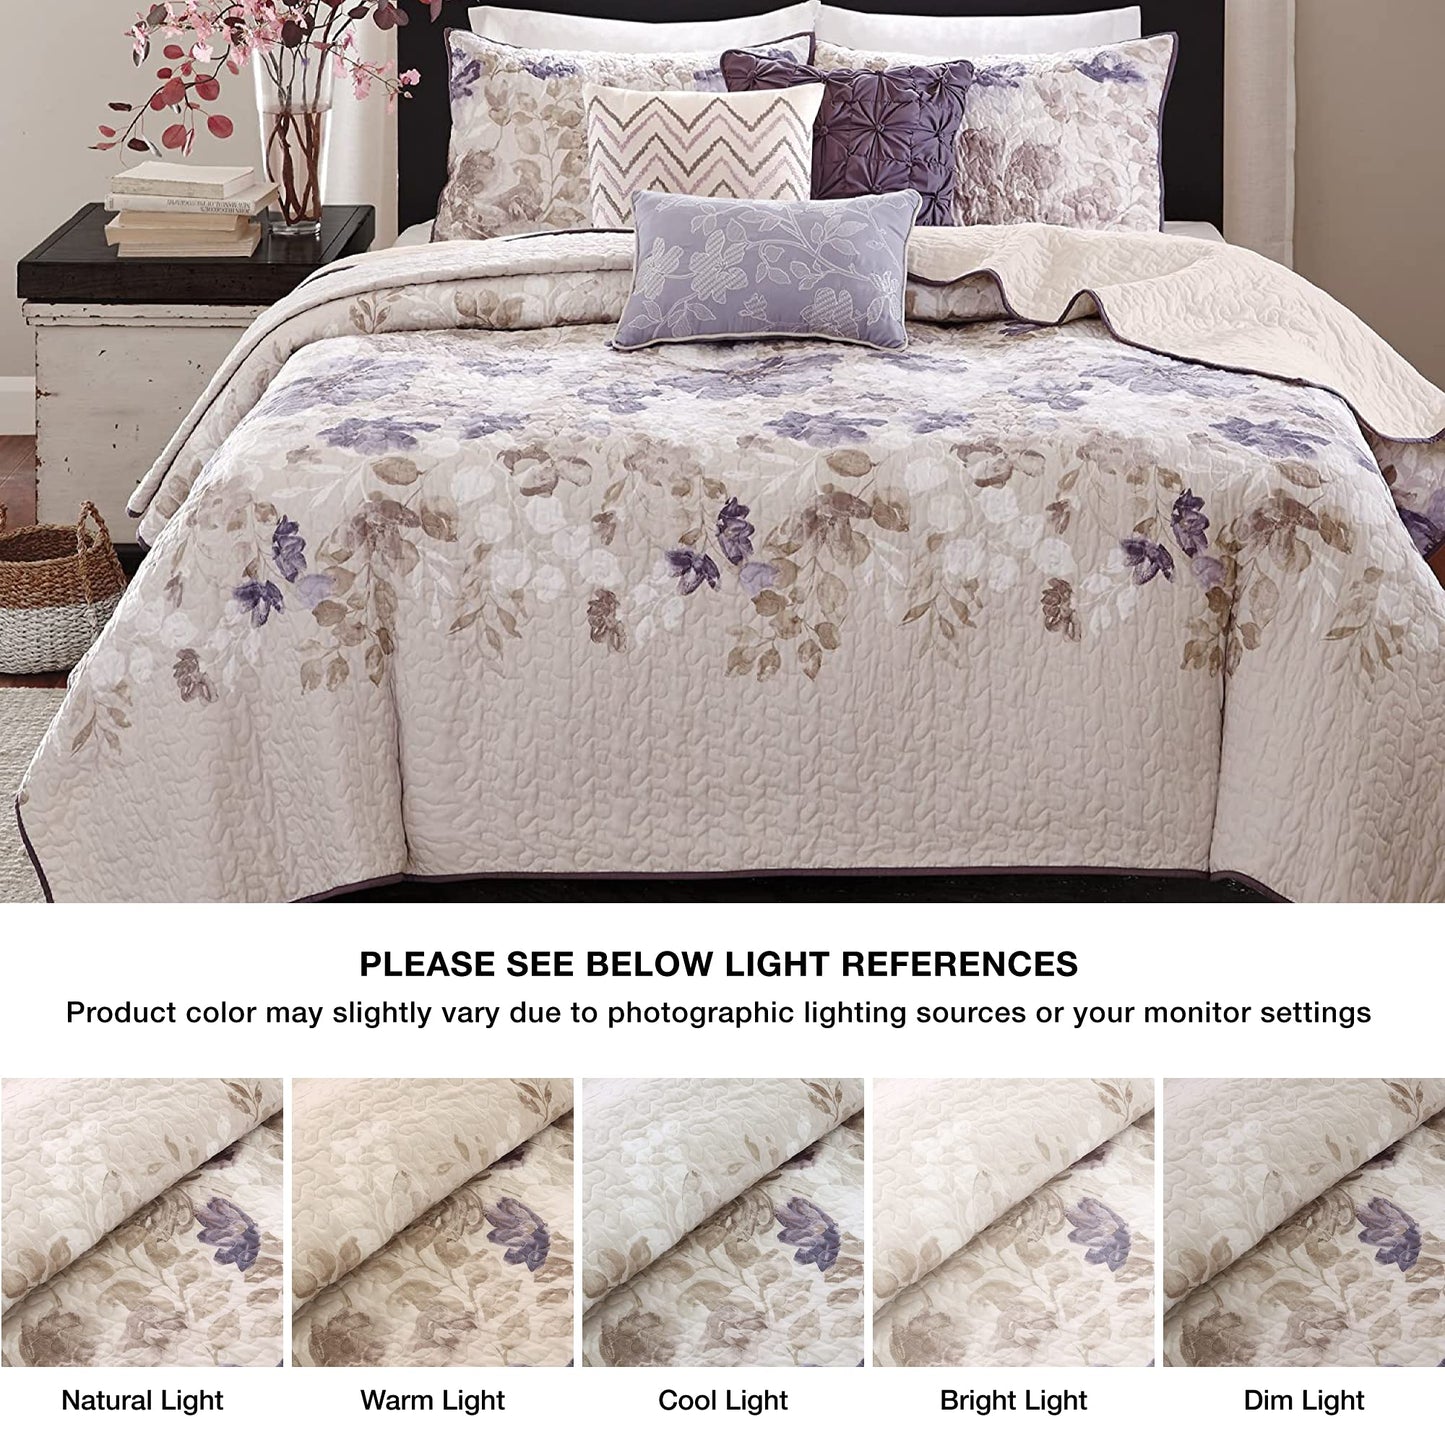 Home Essence Willow 6 Piece Reversible Printed Coverlet Bedding Set